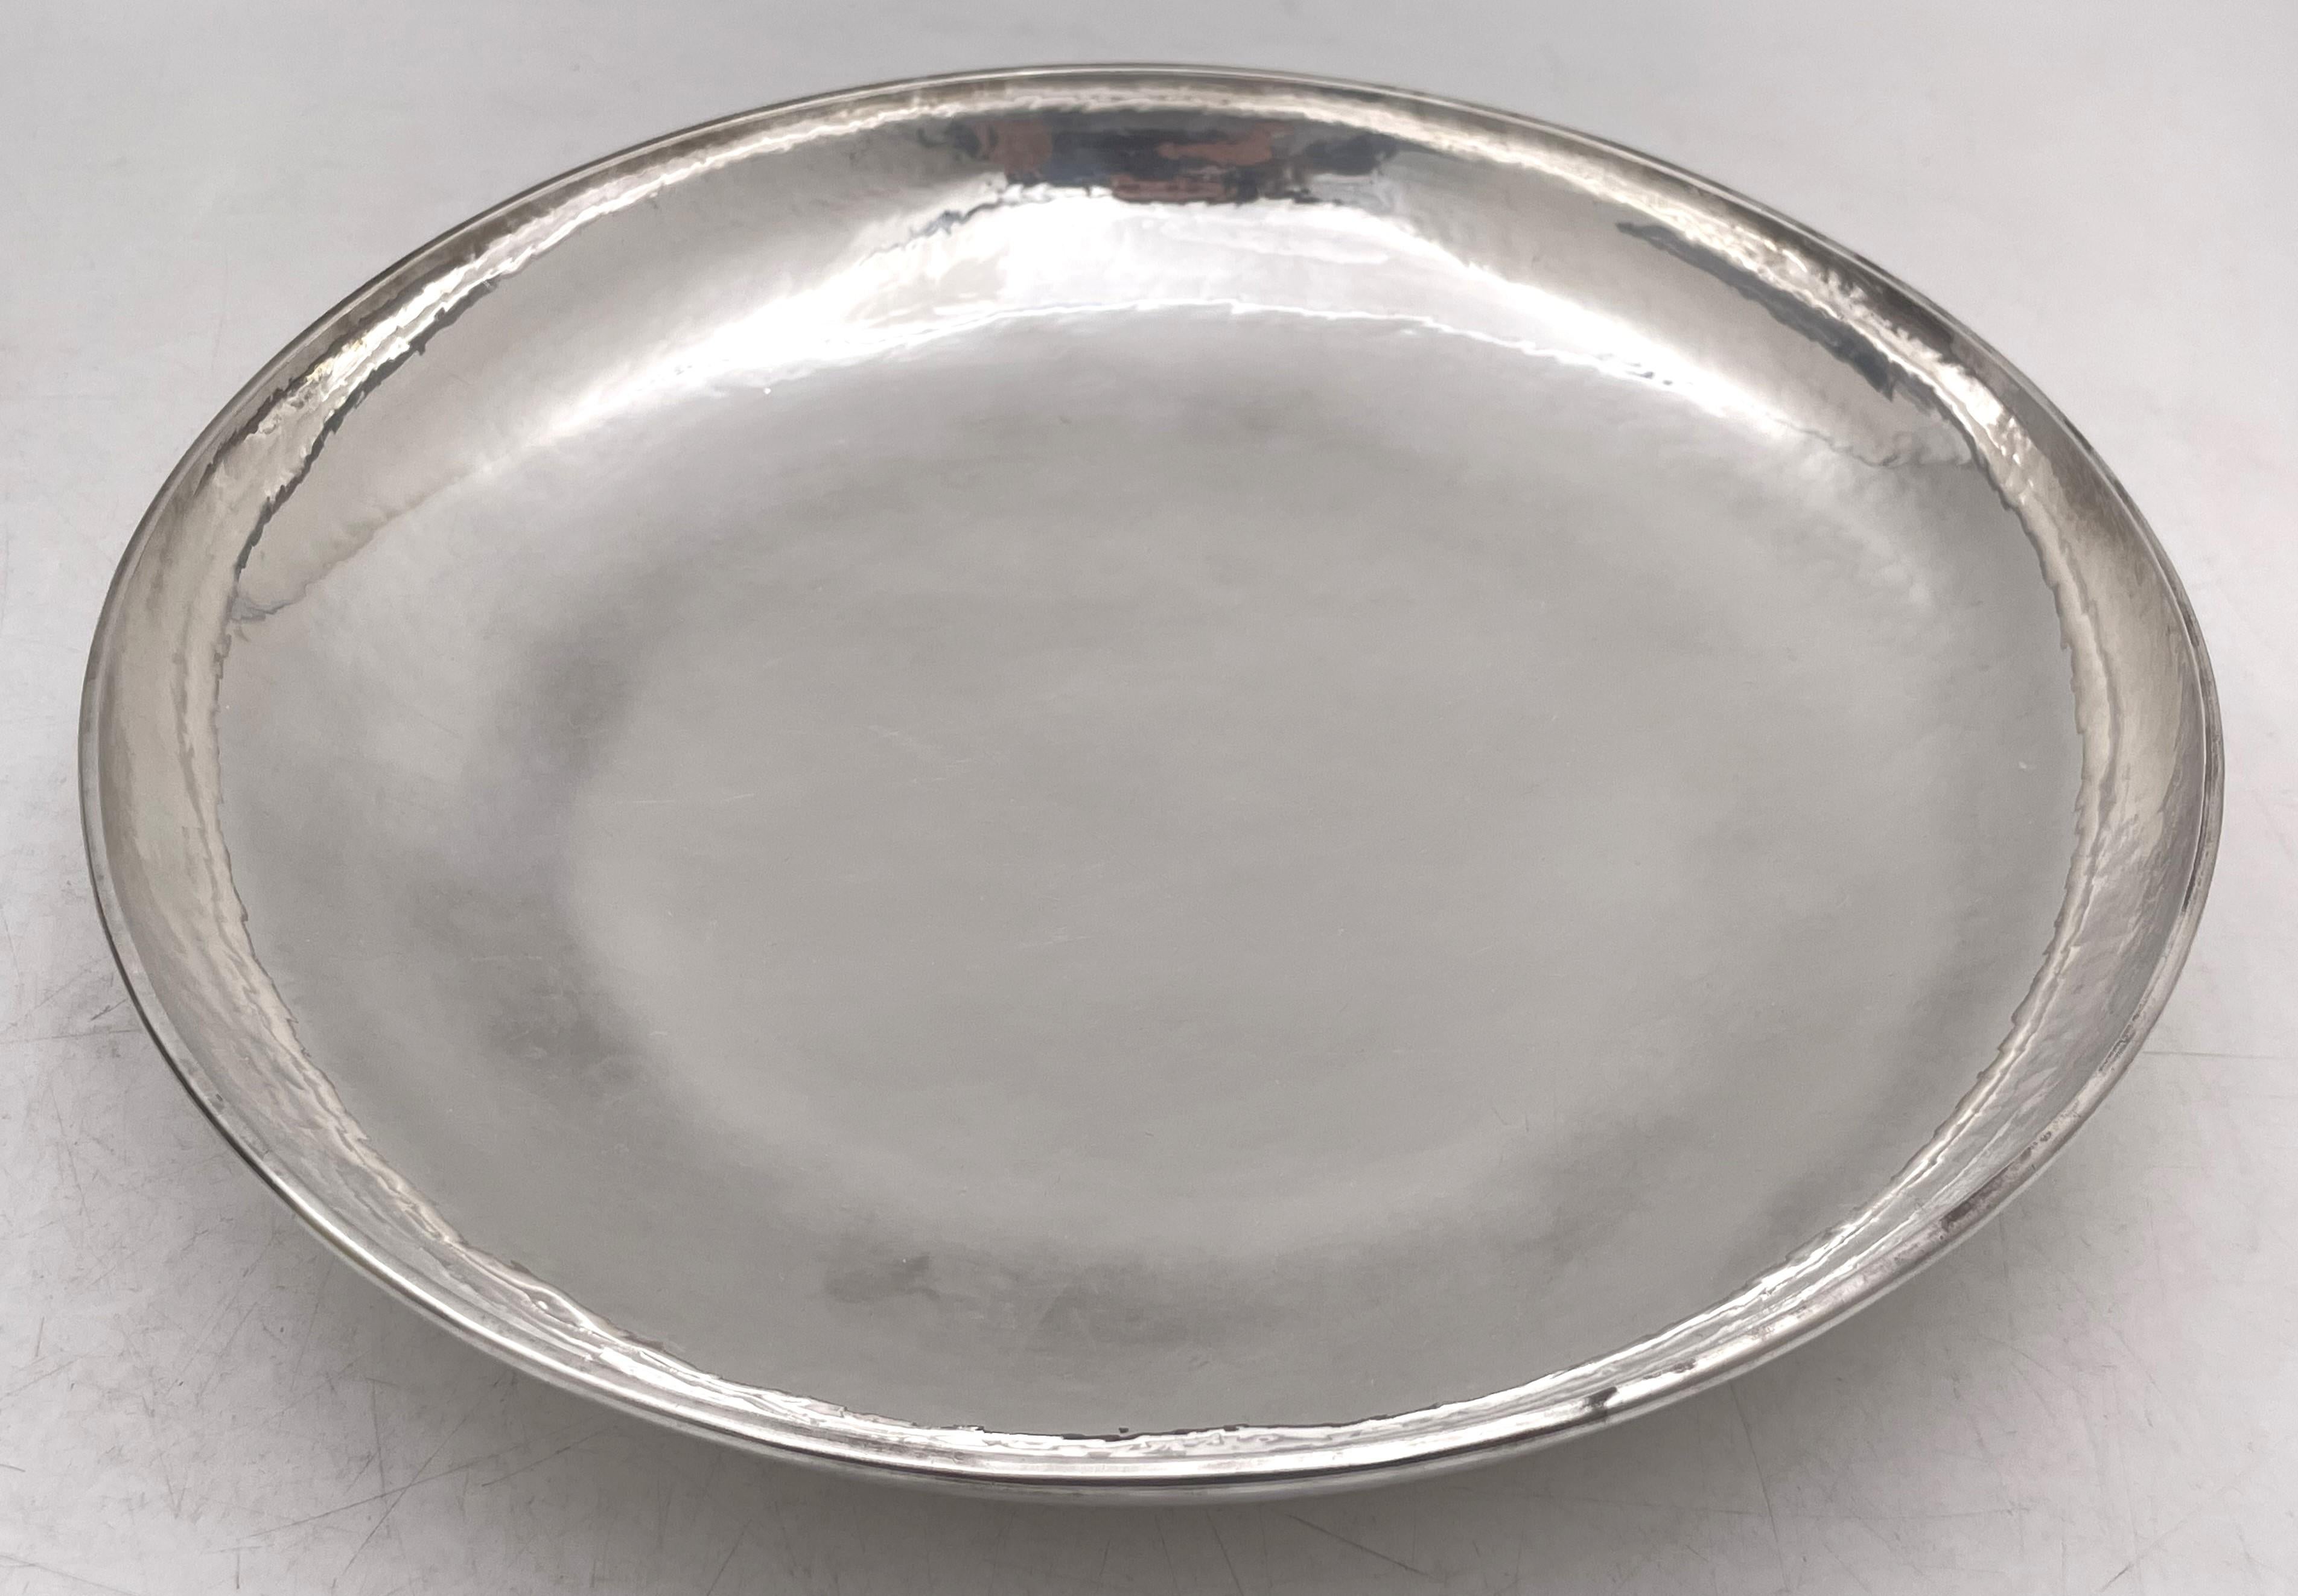 Kalo sterling silver hand wrought or hammered bowl, in Arts & Crafts style, made between 1912 and 1916. It measures 10'' in diameter by 2 1/4'' in height, weighs 19.1 troy ounces, and bears hallmarks as shown. 

The Kalo Shop was the 